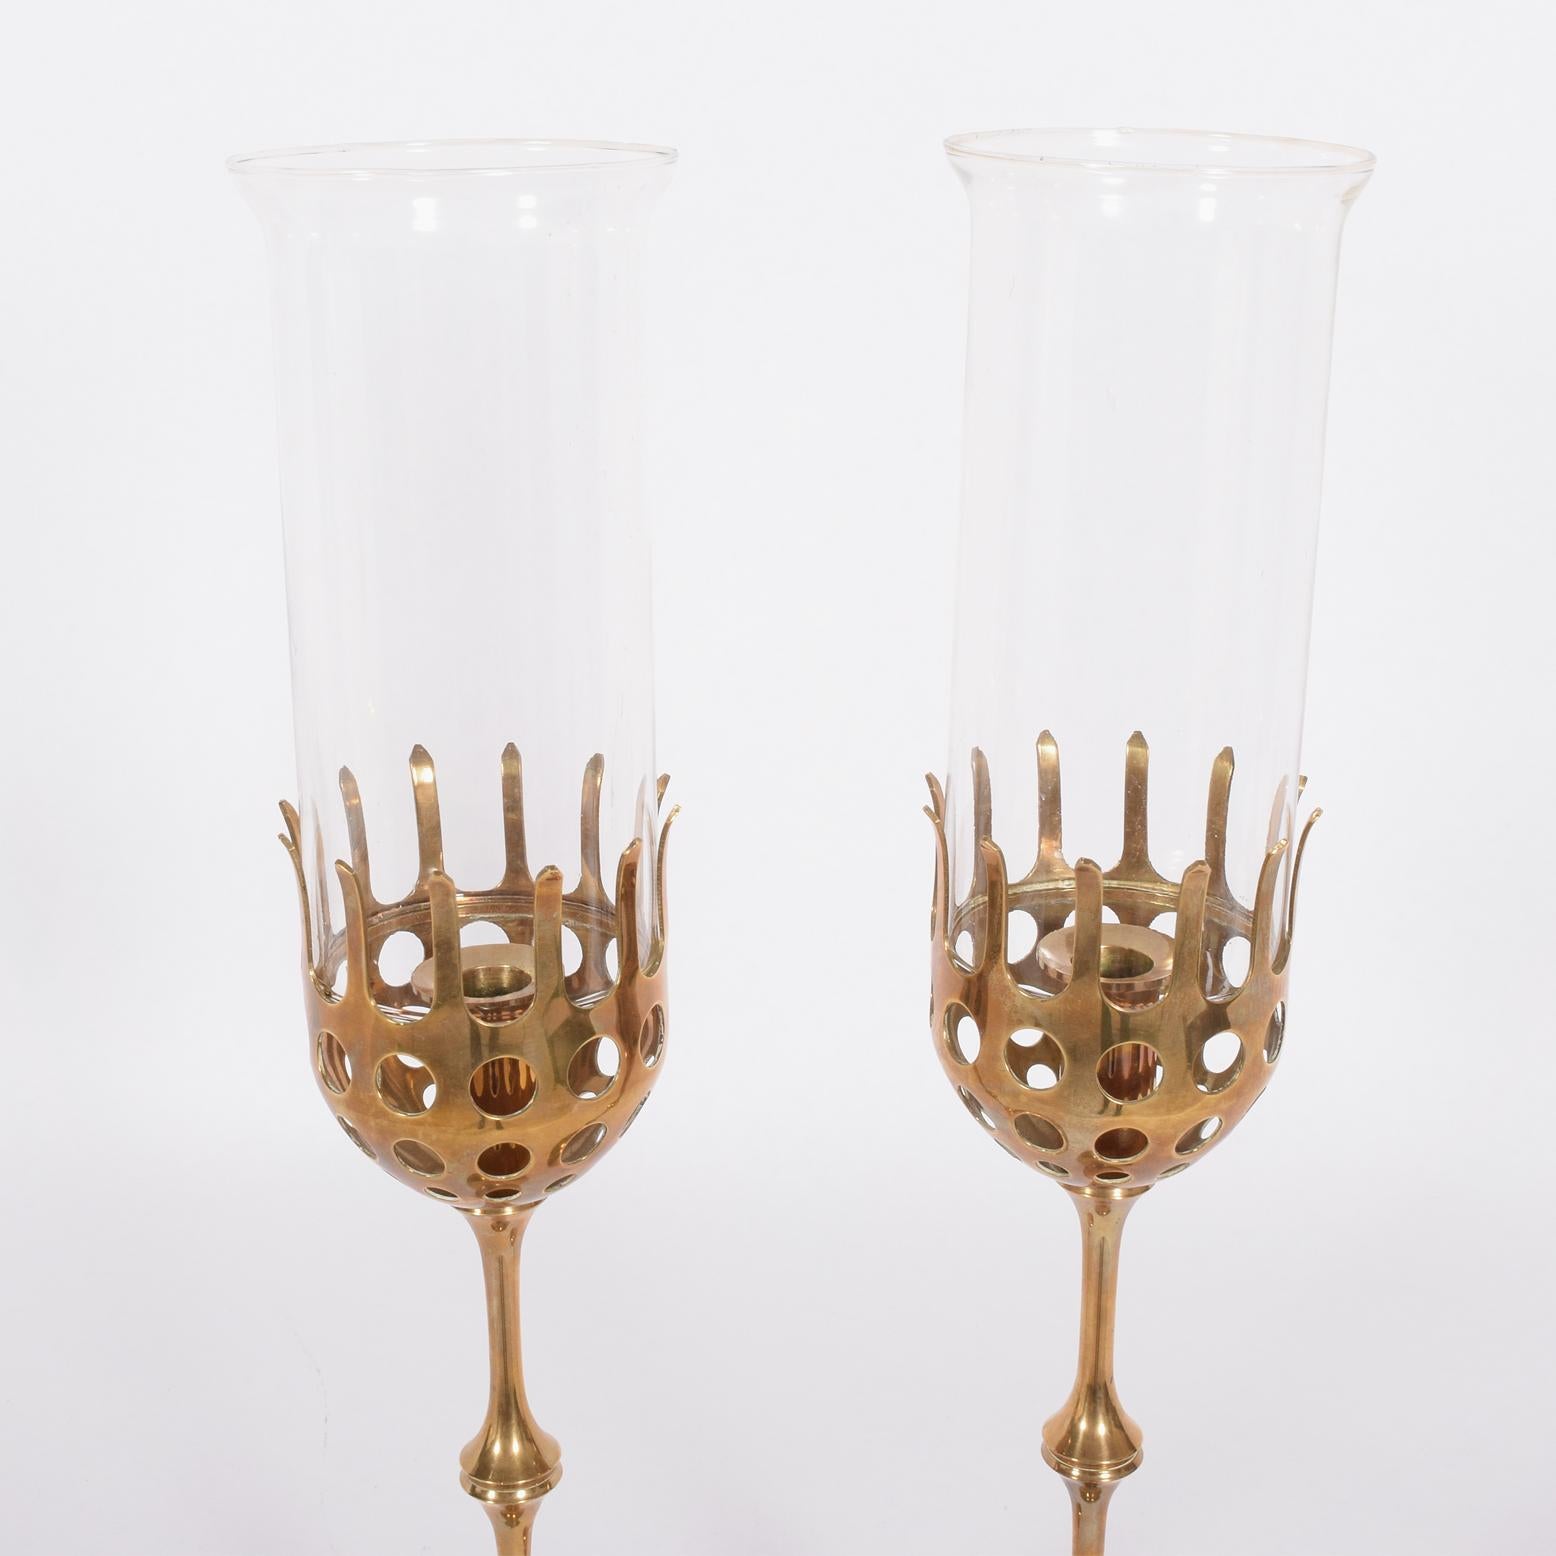 Brass candlesticks with glass shades. Adjustable to shorter height. Made by Bjorn Wiinblad Studio. Signed.